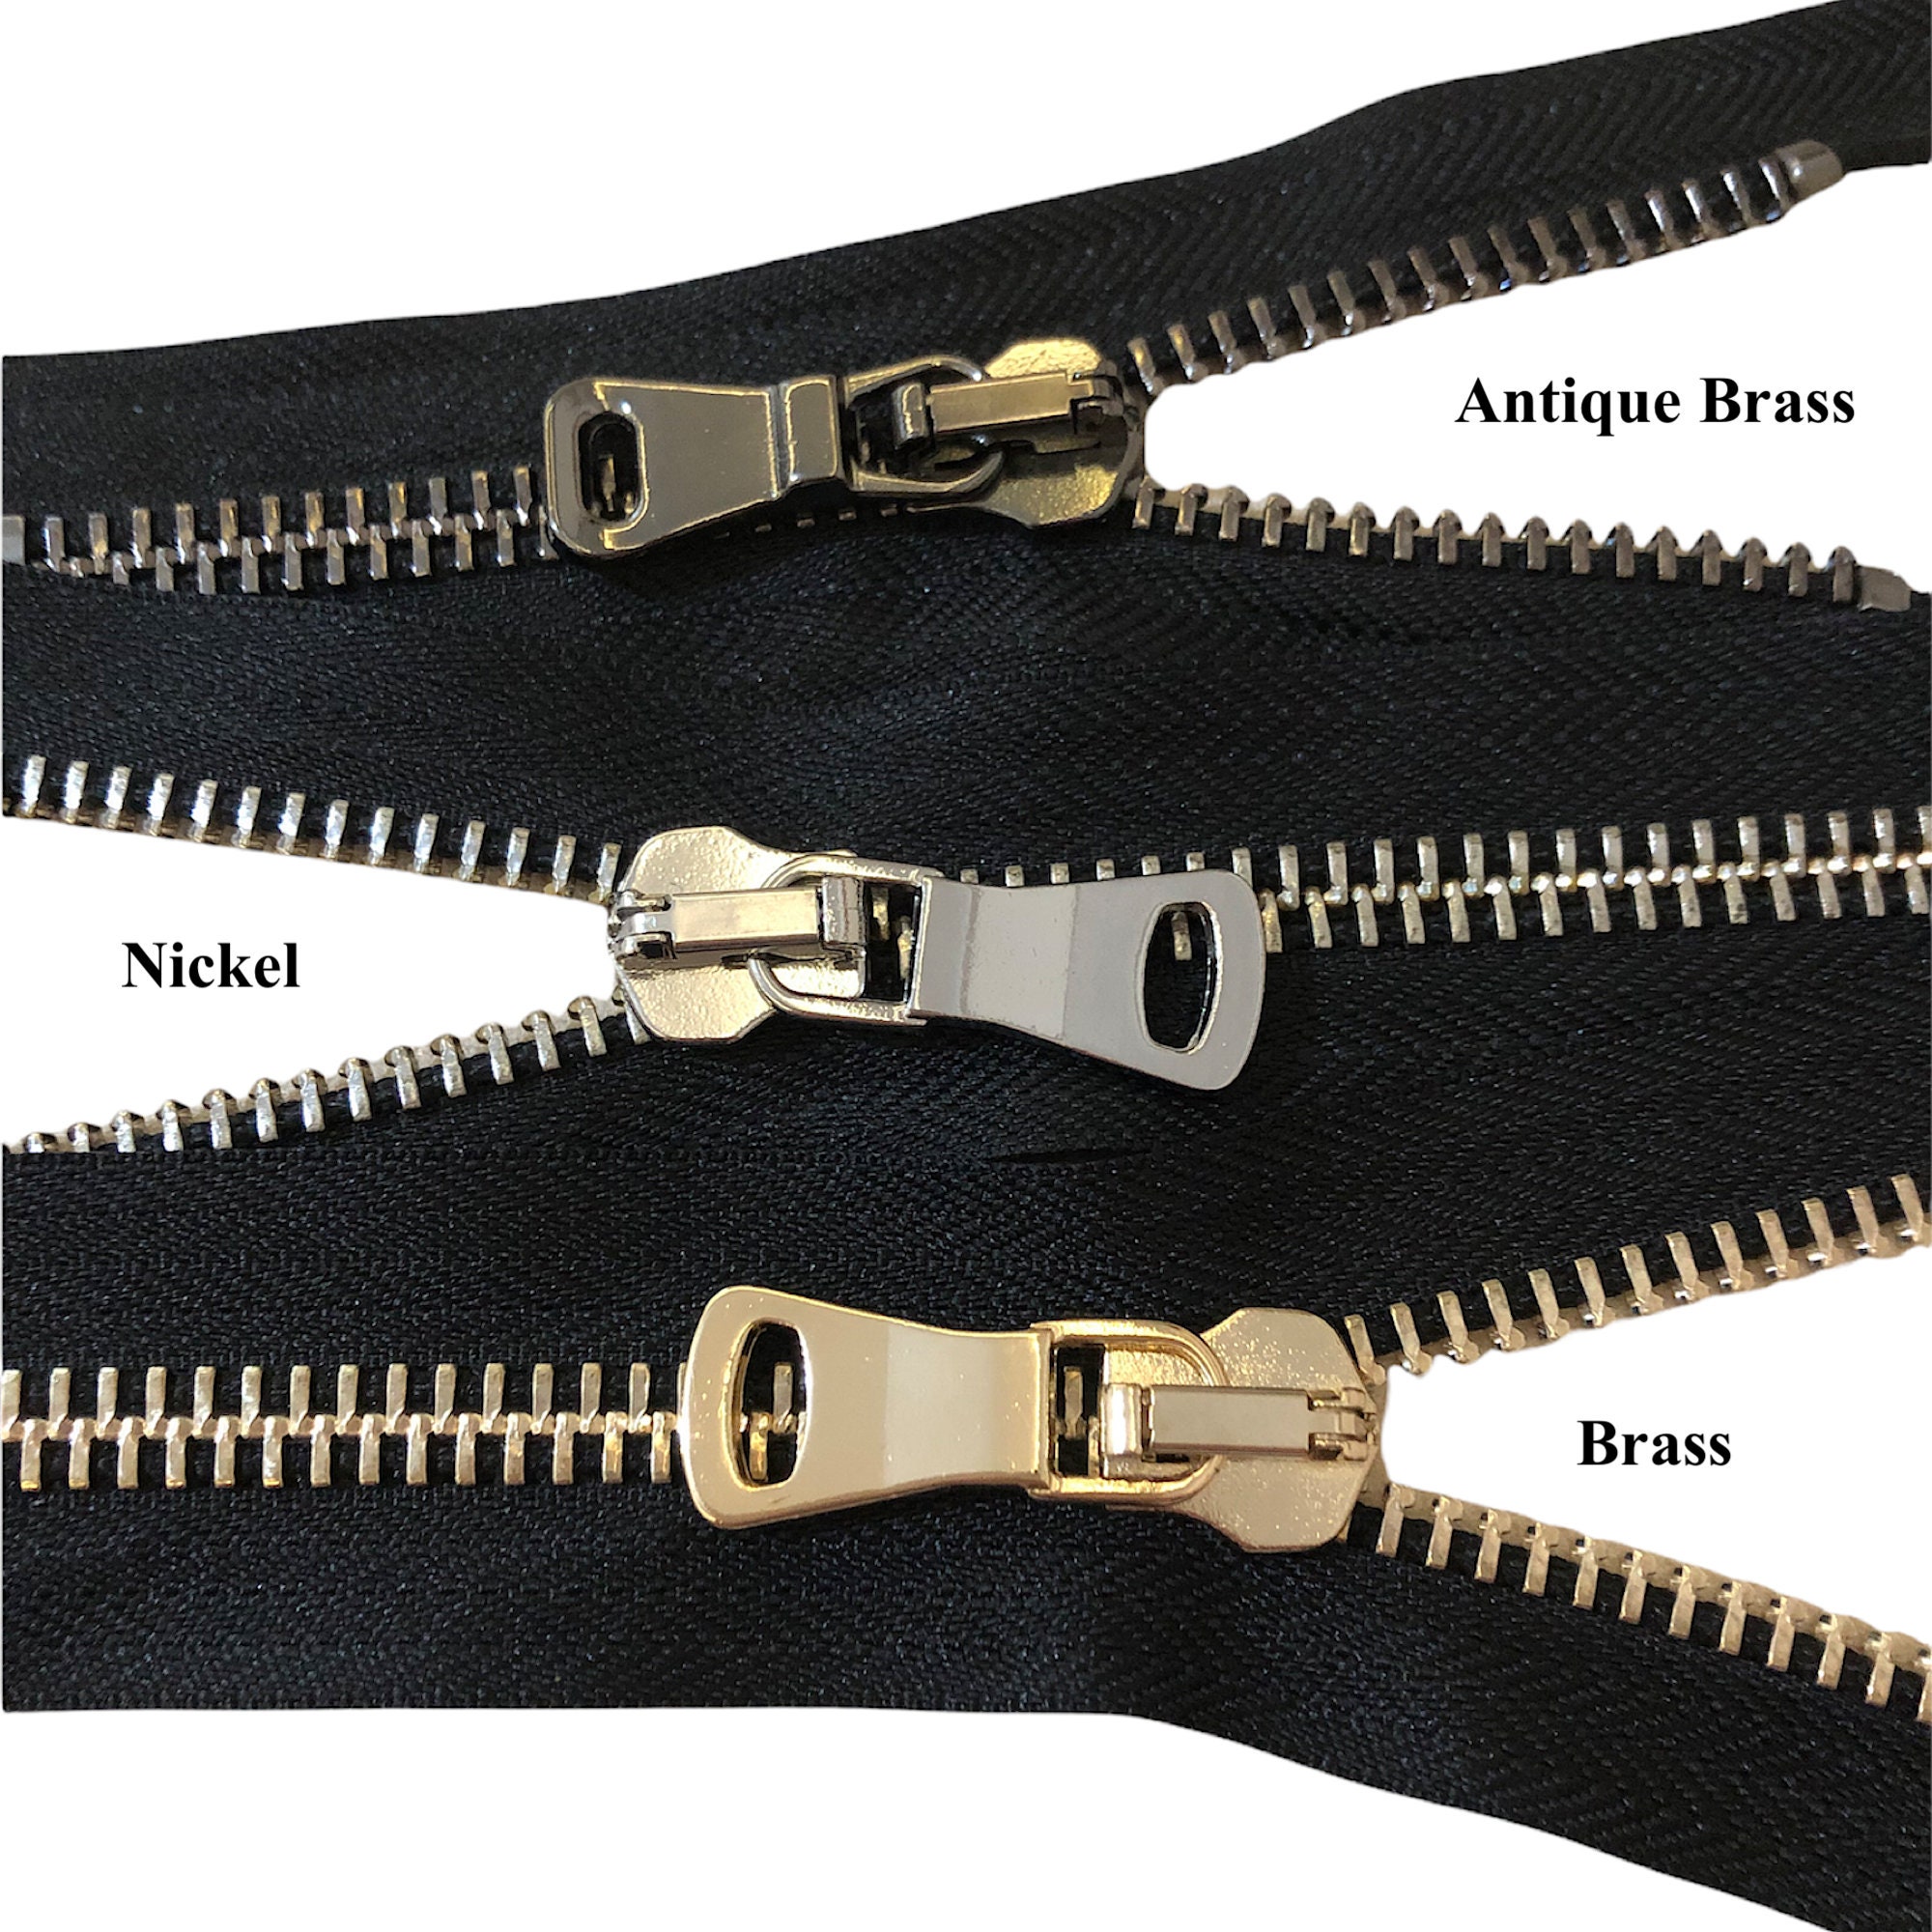 YKK Metal Zippers in Bulk, 5 Pcs, Black Color 580, Gold Teeth, Brass,  Polyester Tape, 4, 5, 6, 7, 8, 9, 10, 12, 14 Inch Sizes, No 5 Teeth 